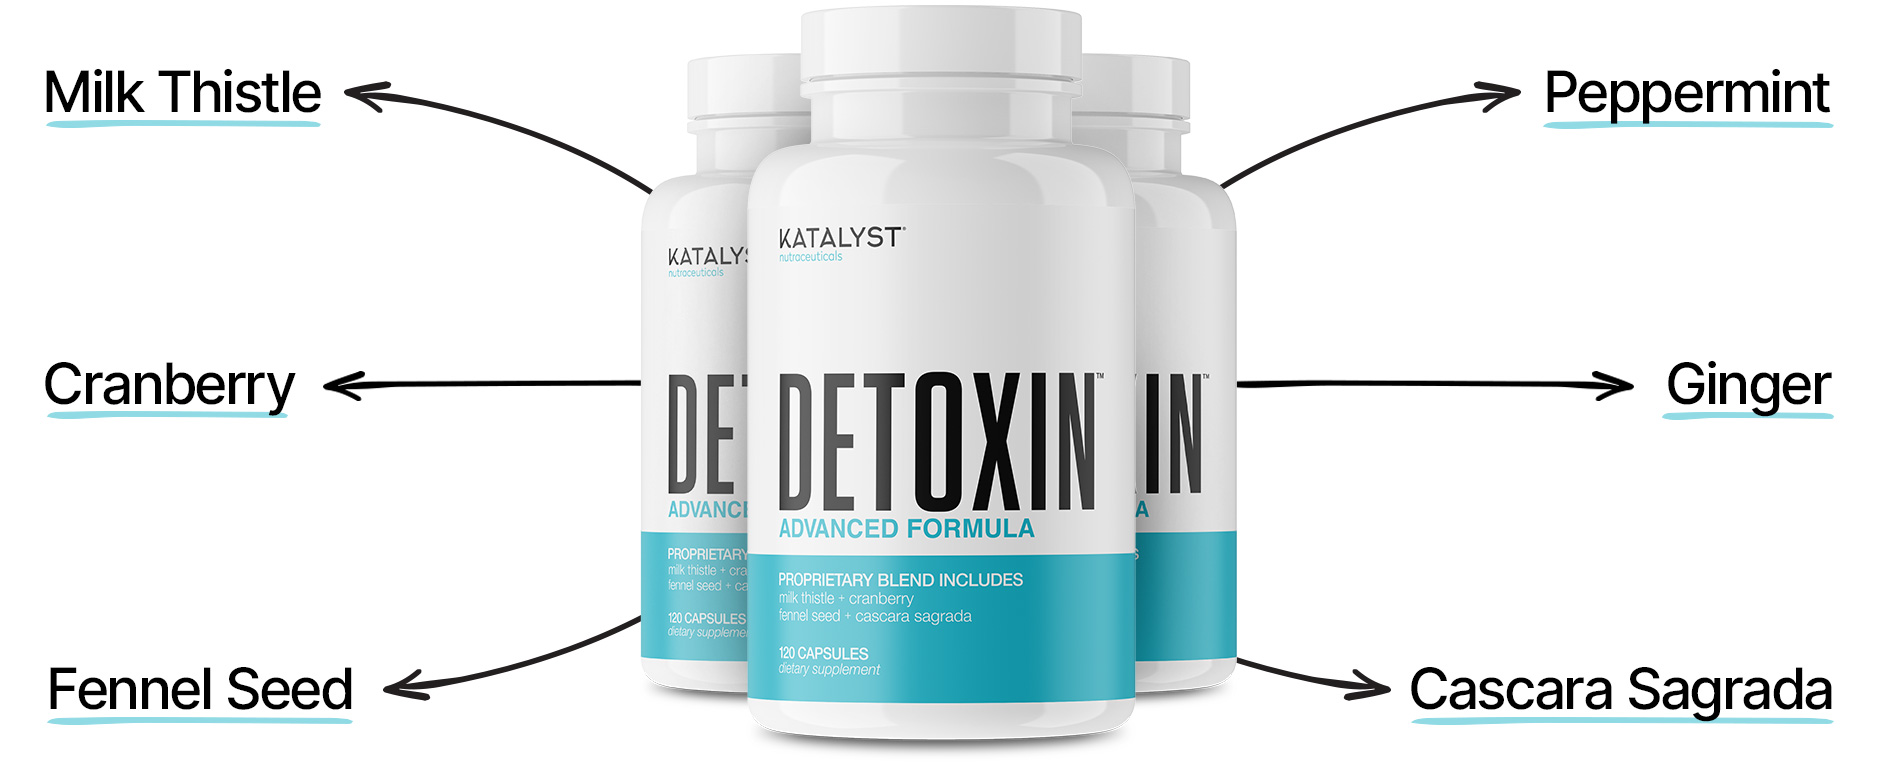 What's in detoxin? Milk Thistle, Cranberry, Fernal Seed, Peppermint, Ginger, Cascara Sagrada